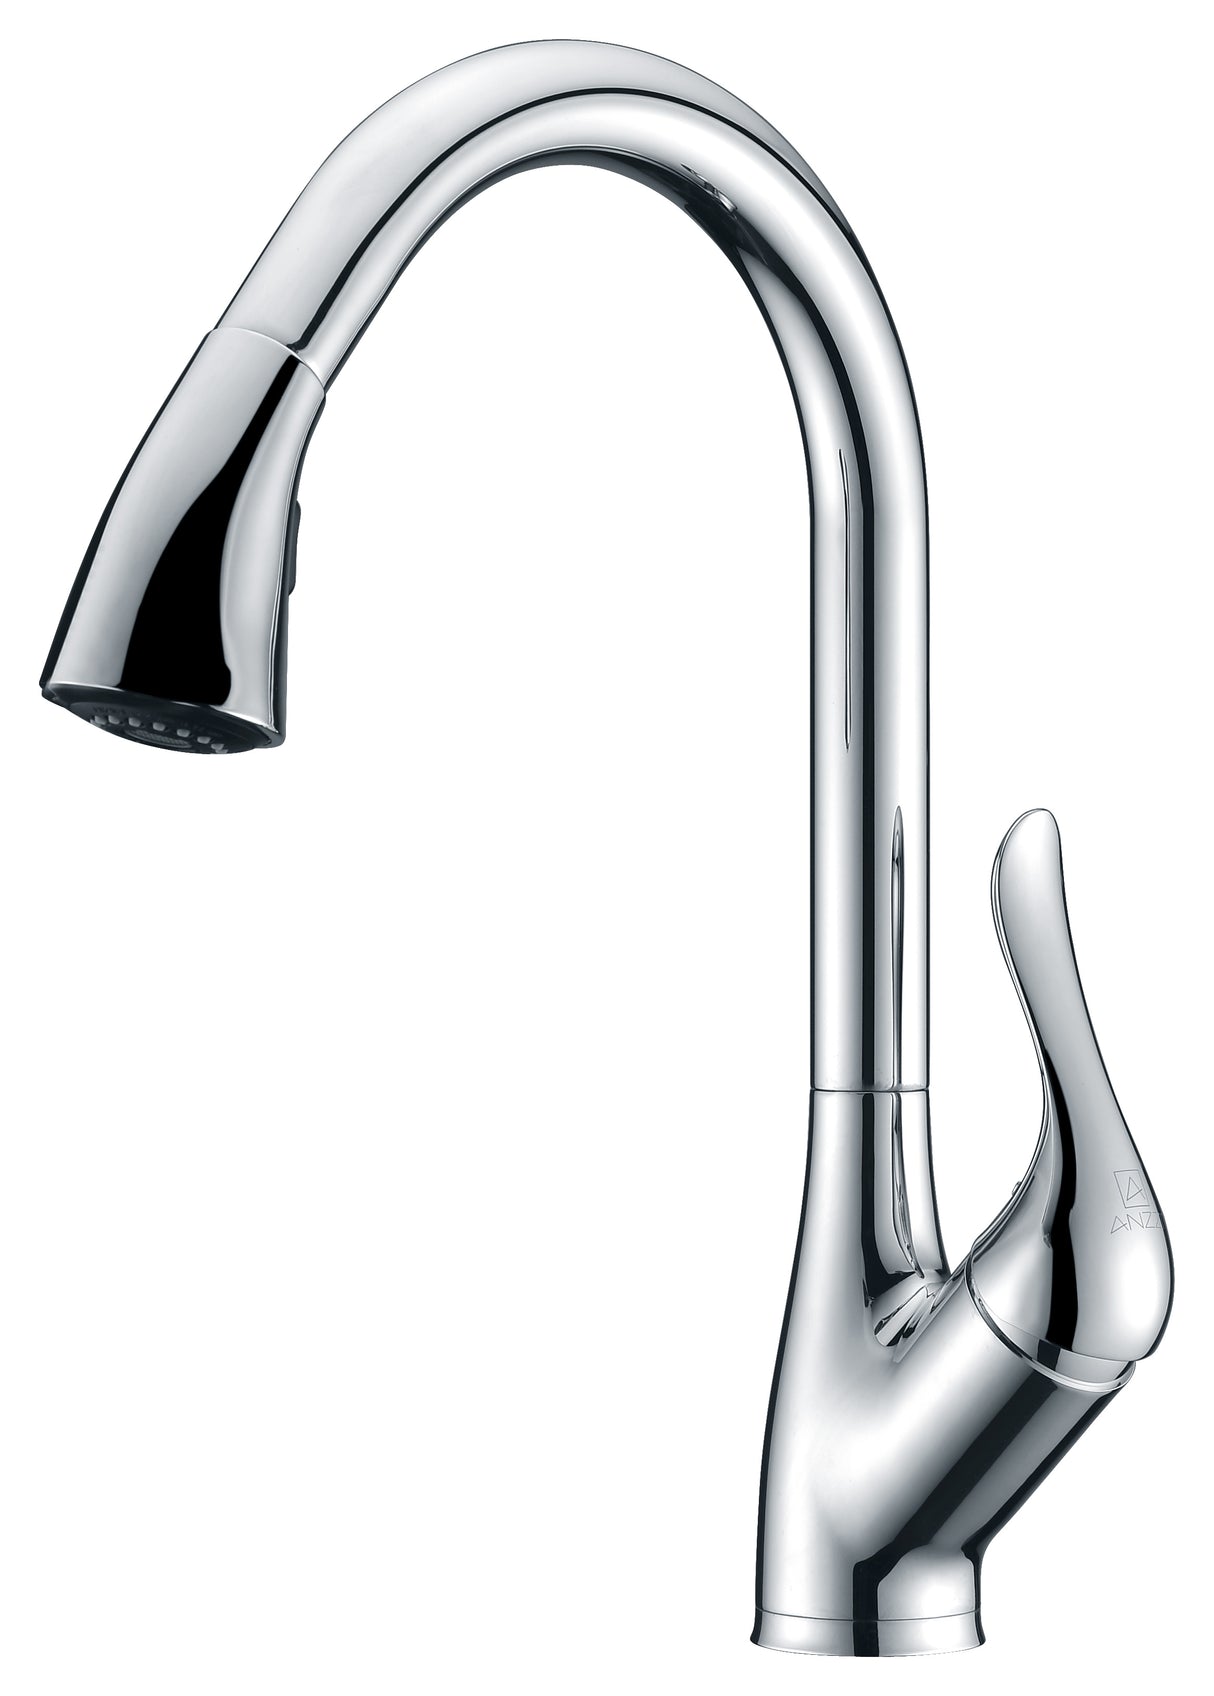 ANZZI KF-AZ031 Accent Series Single-Handle Pull-Down Sprayer Kitchen Faucet in Polished Chrome